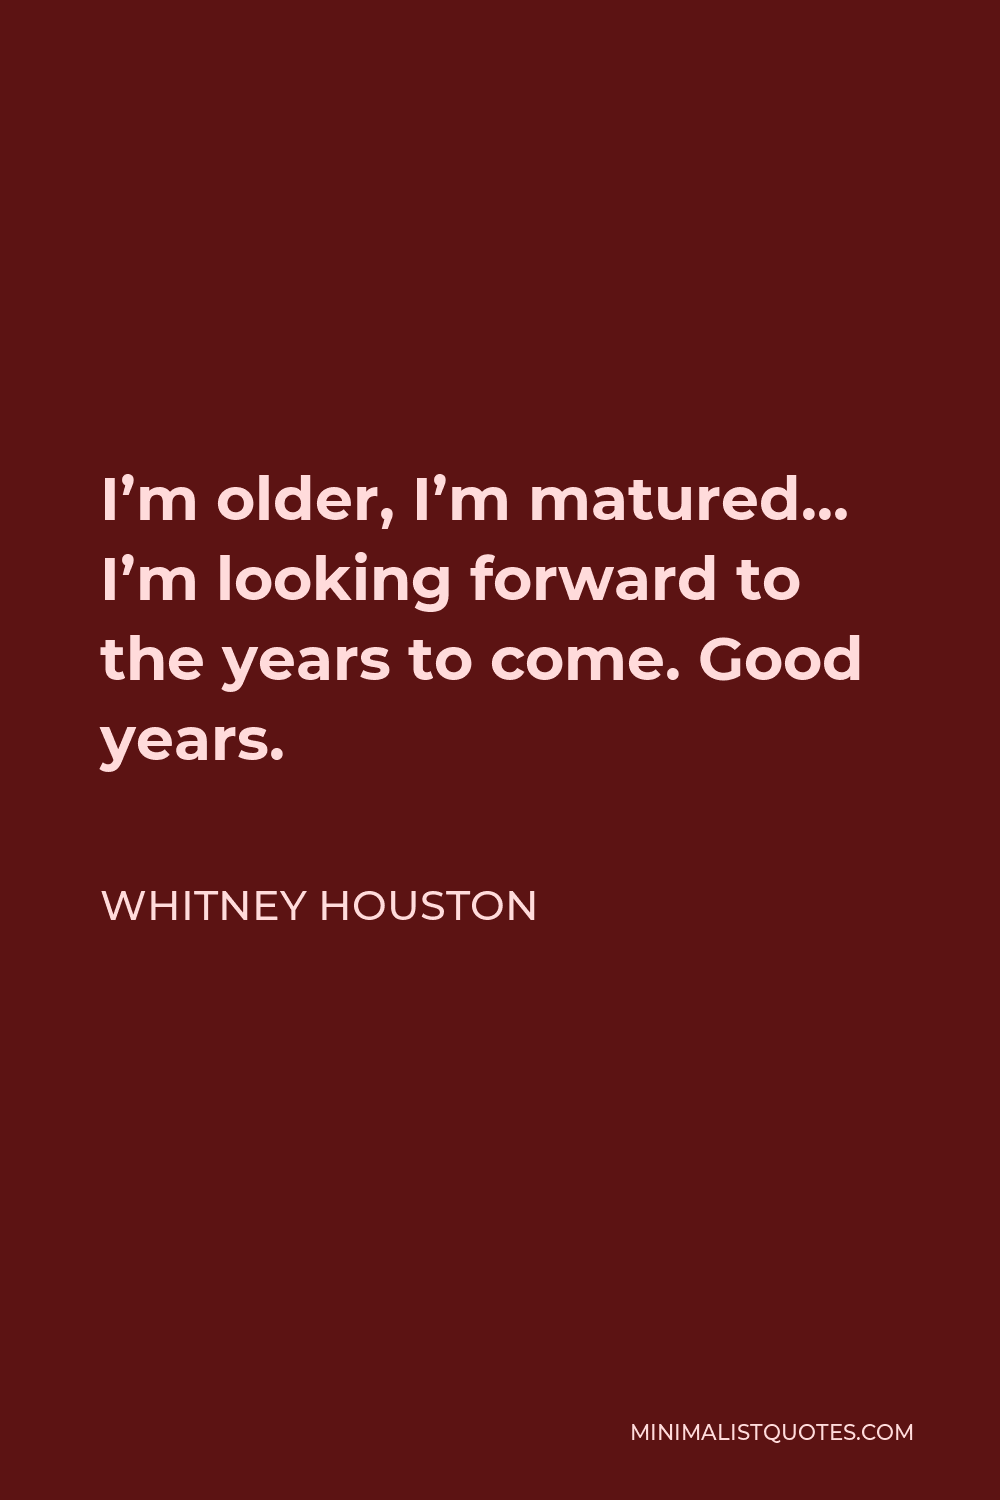 Whitney Houston Quote - I’m older, I’m matured… I’m looking forward to the years to come. Good years.